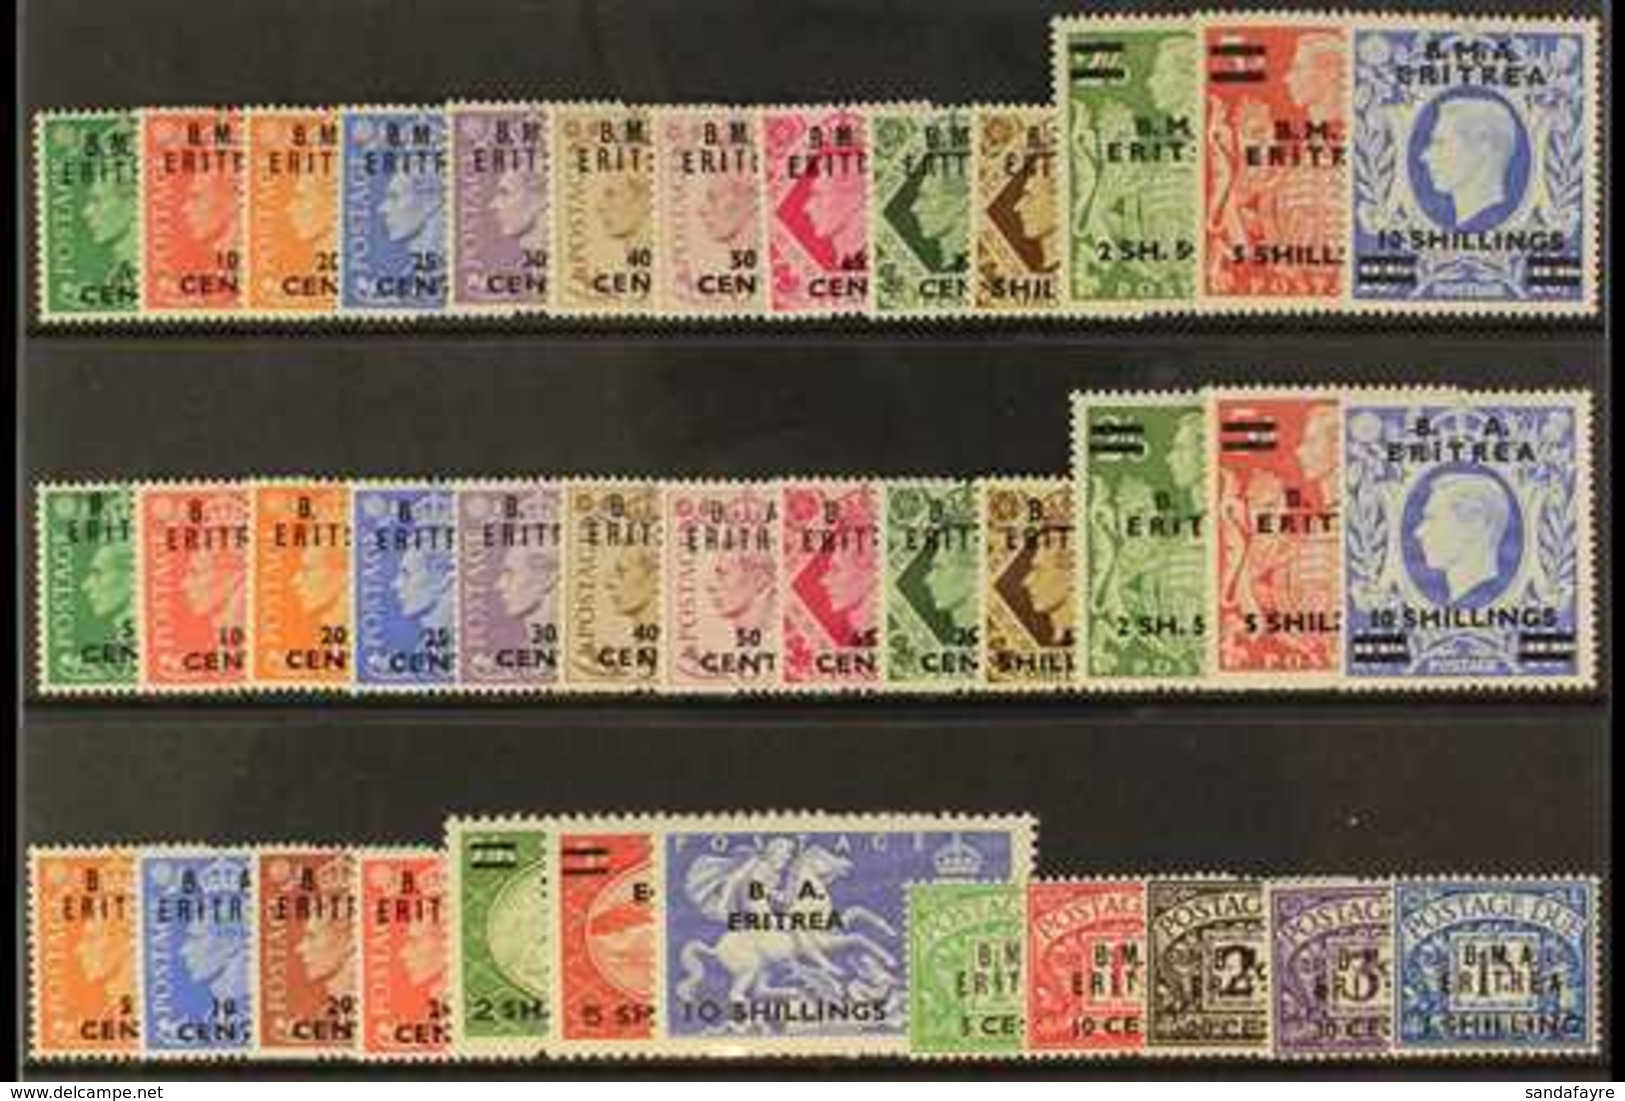 ERITREA  1948-51 MINT COLLECTION Of Complete Sets On A Stock Card, Inc 1948-49 Set, 1950 Set, 1951 Set & 1948 Dues Set.  - Italiaans Oost-Afrika